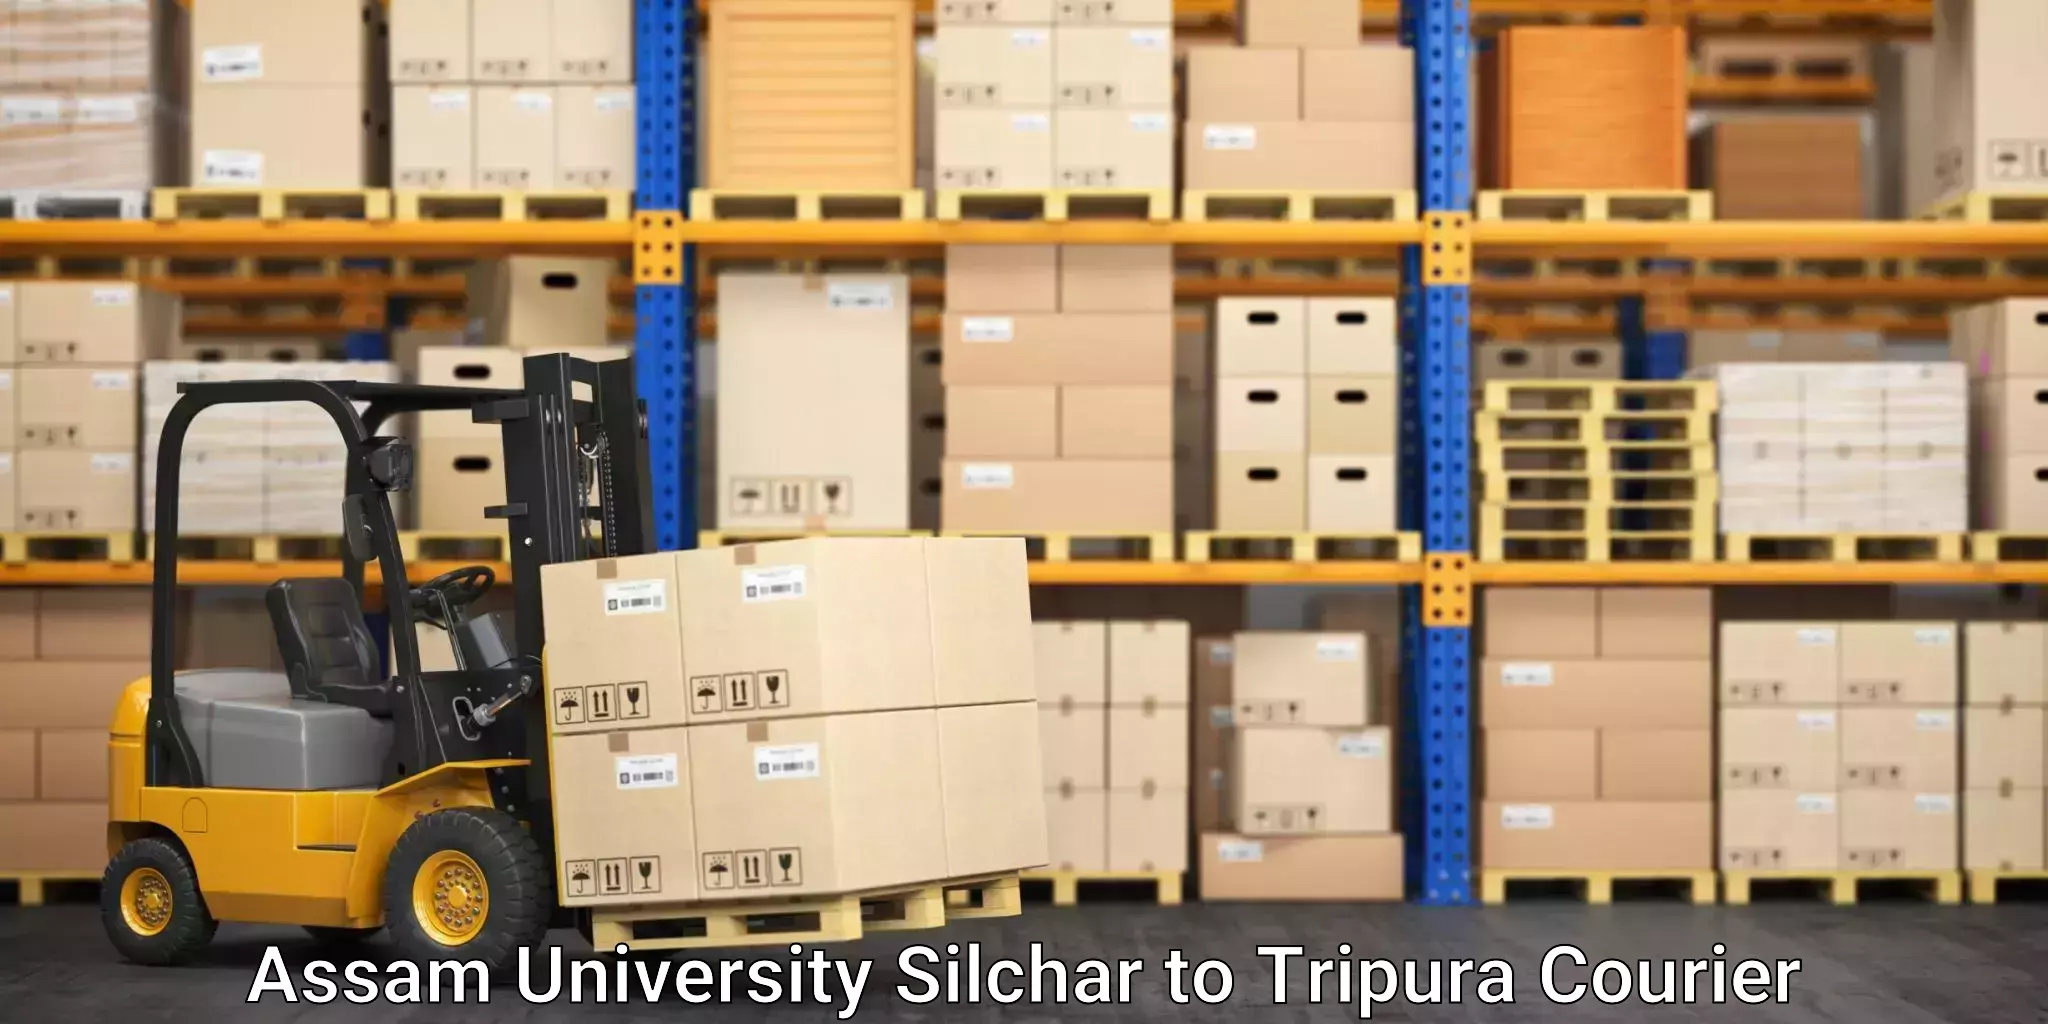 Expedited shipping solutions Assam University Silchar to Bishalgarh